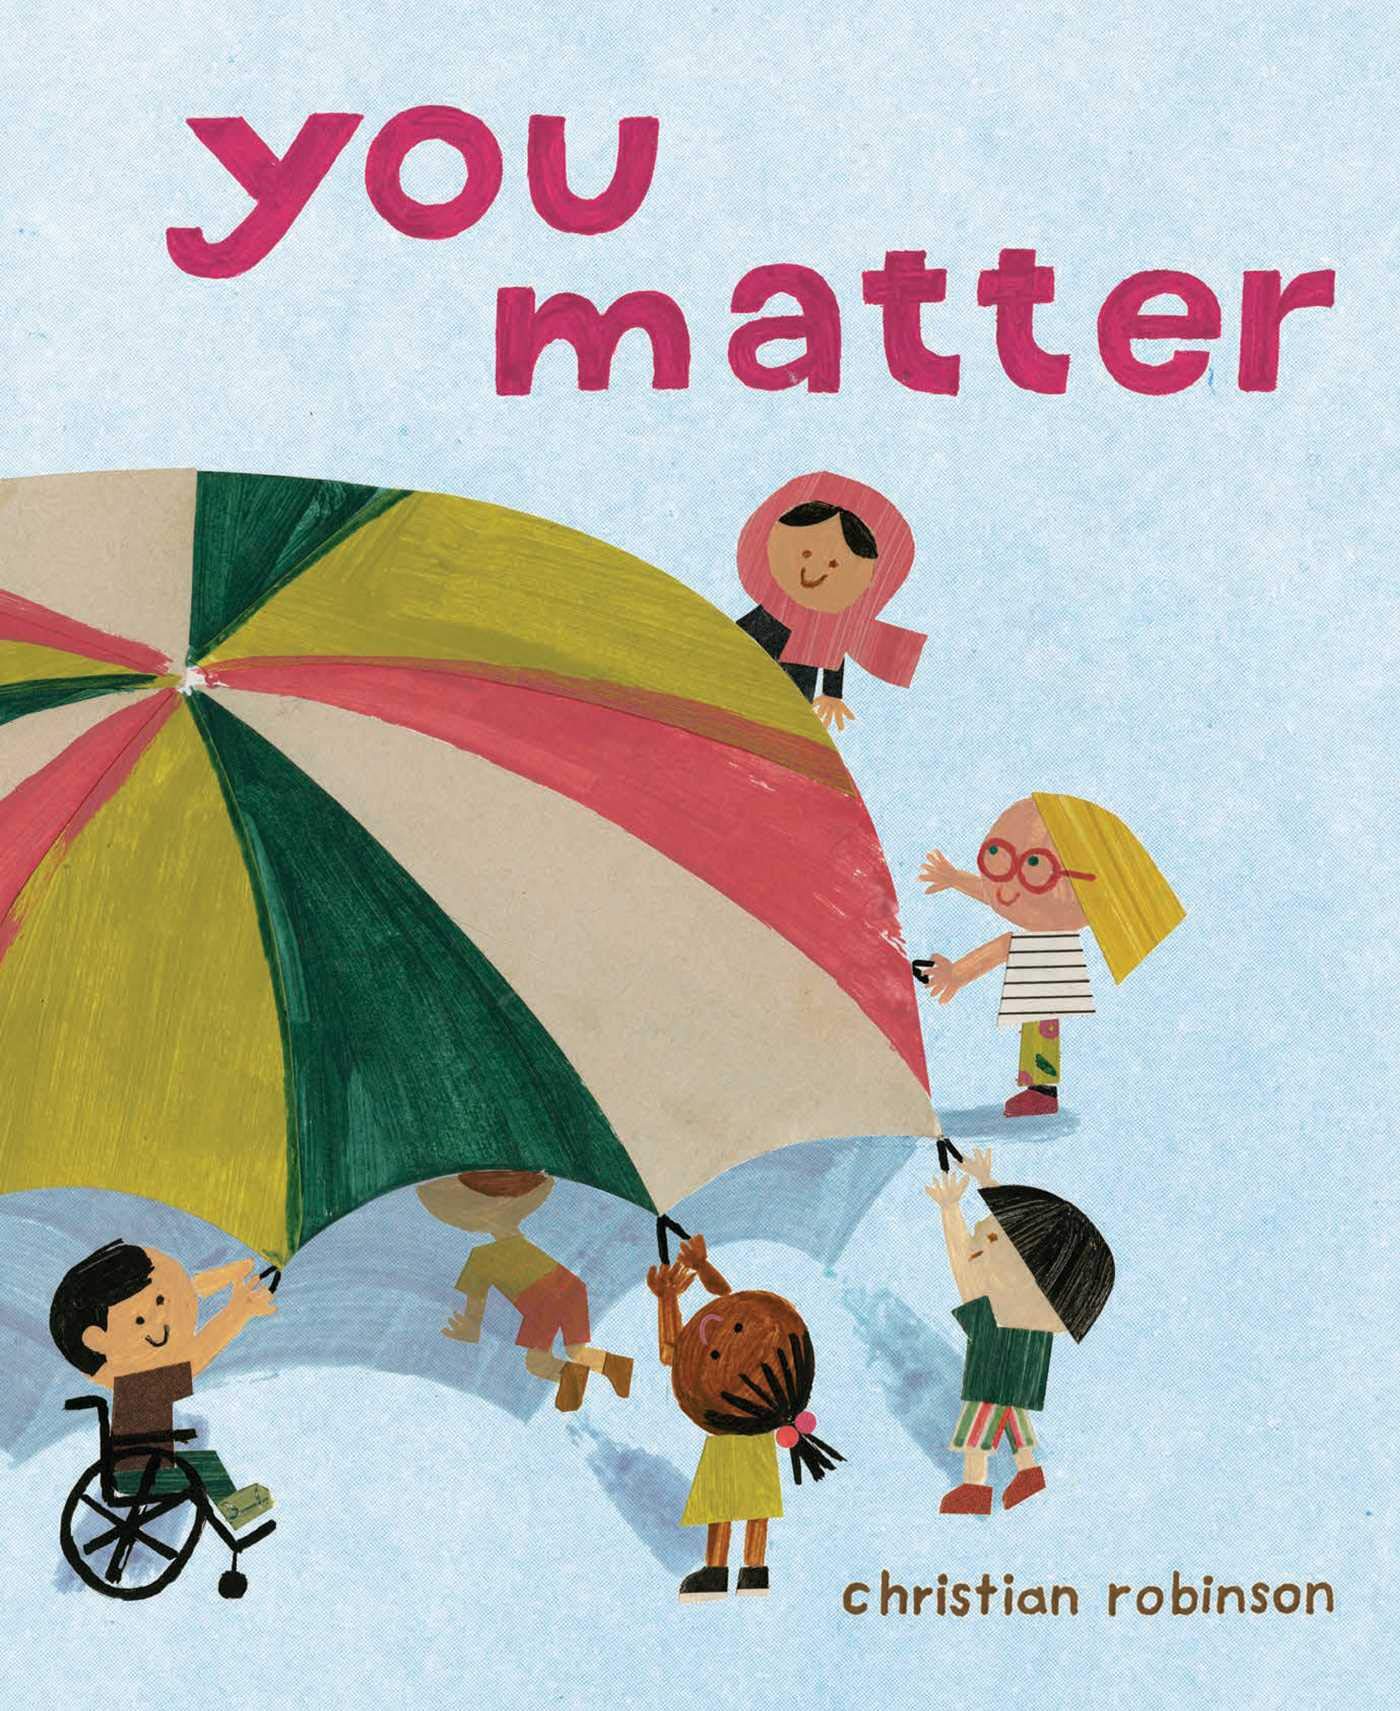 Book cover for "You Matter"